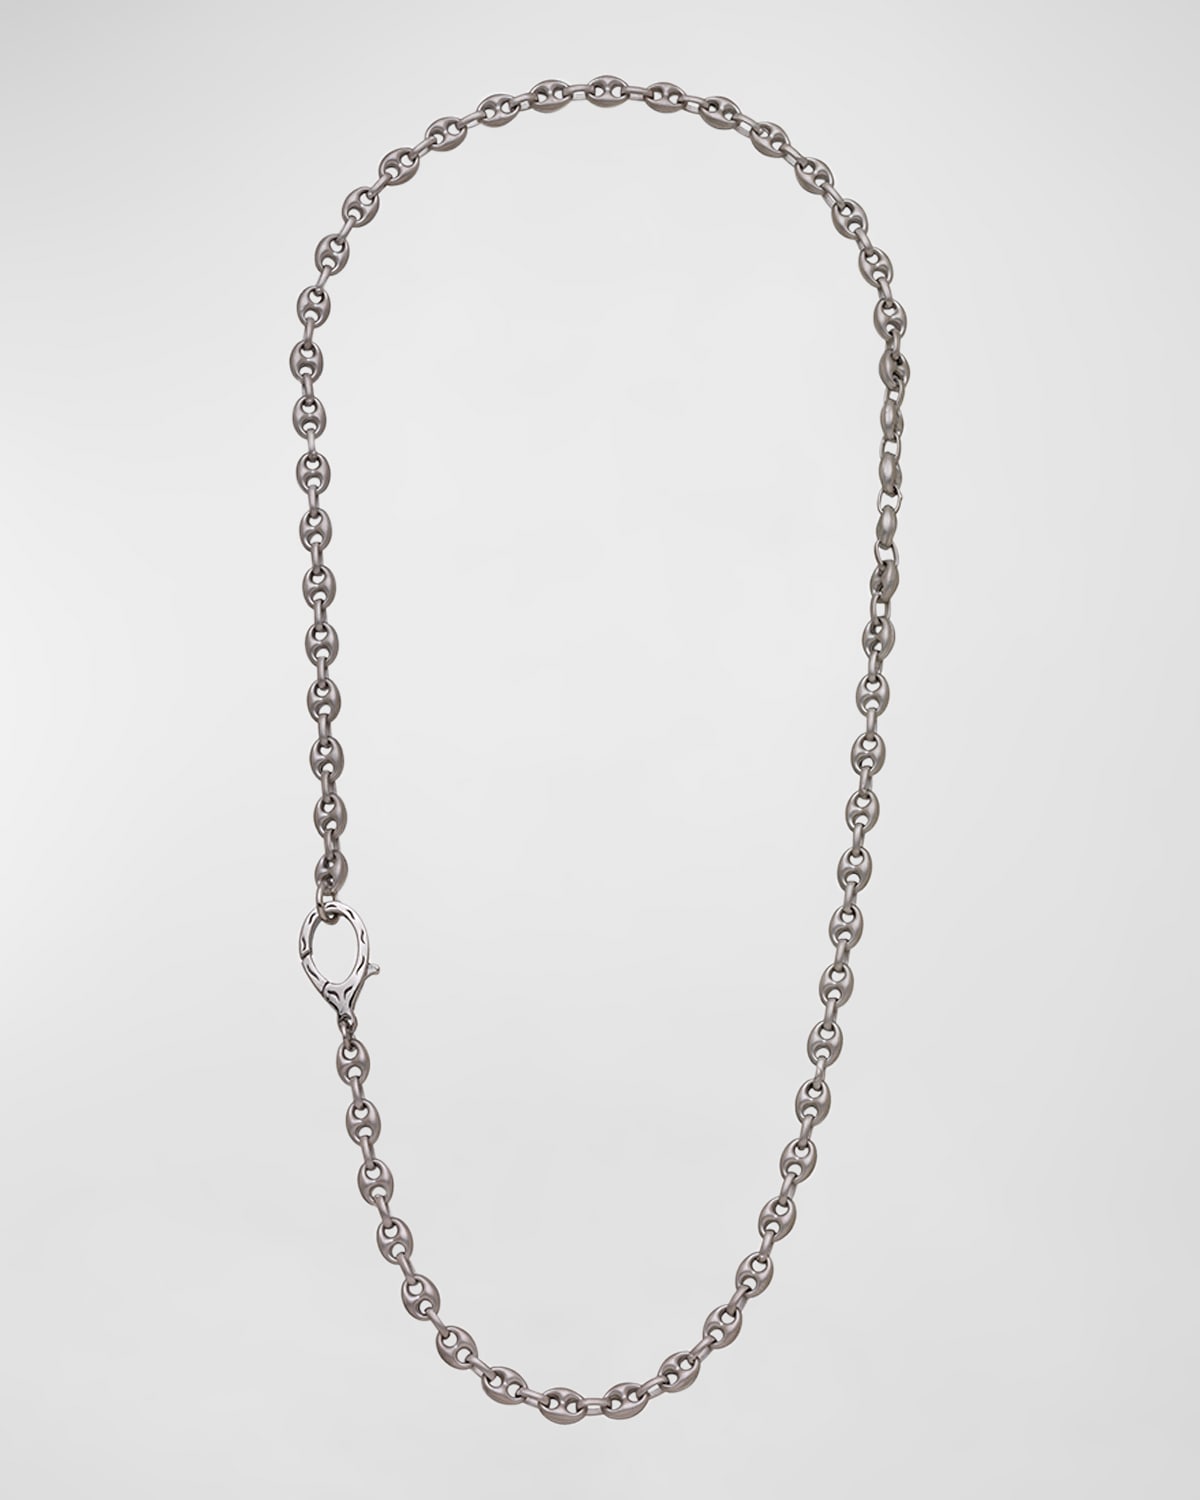 Marco Dal Maso Marine Silver Necklace In Matte Chain And Polished Clasp, 22"l